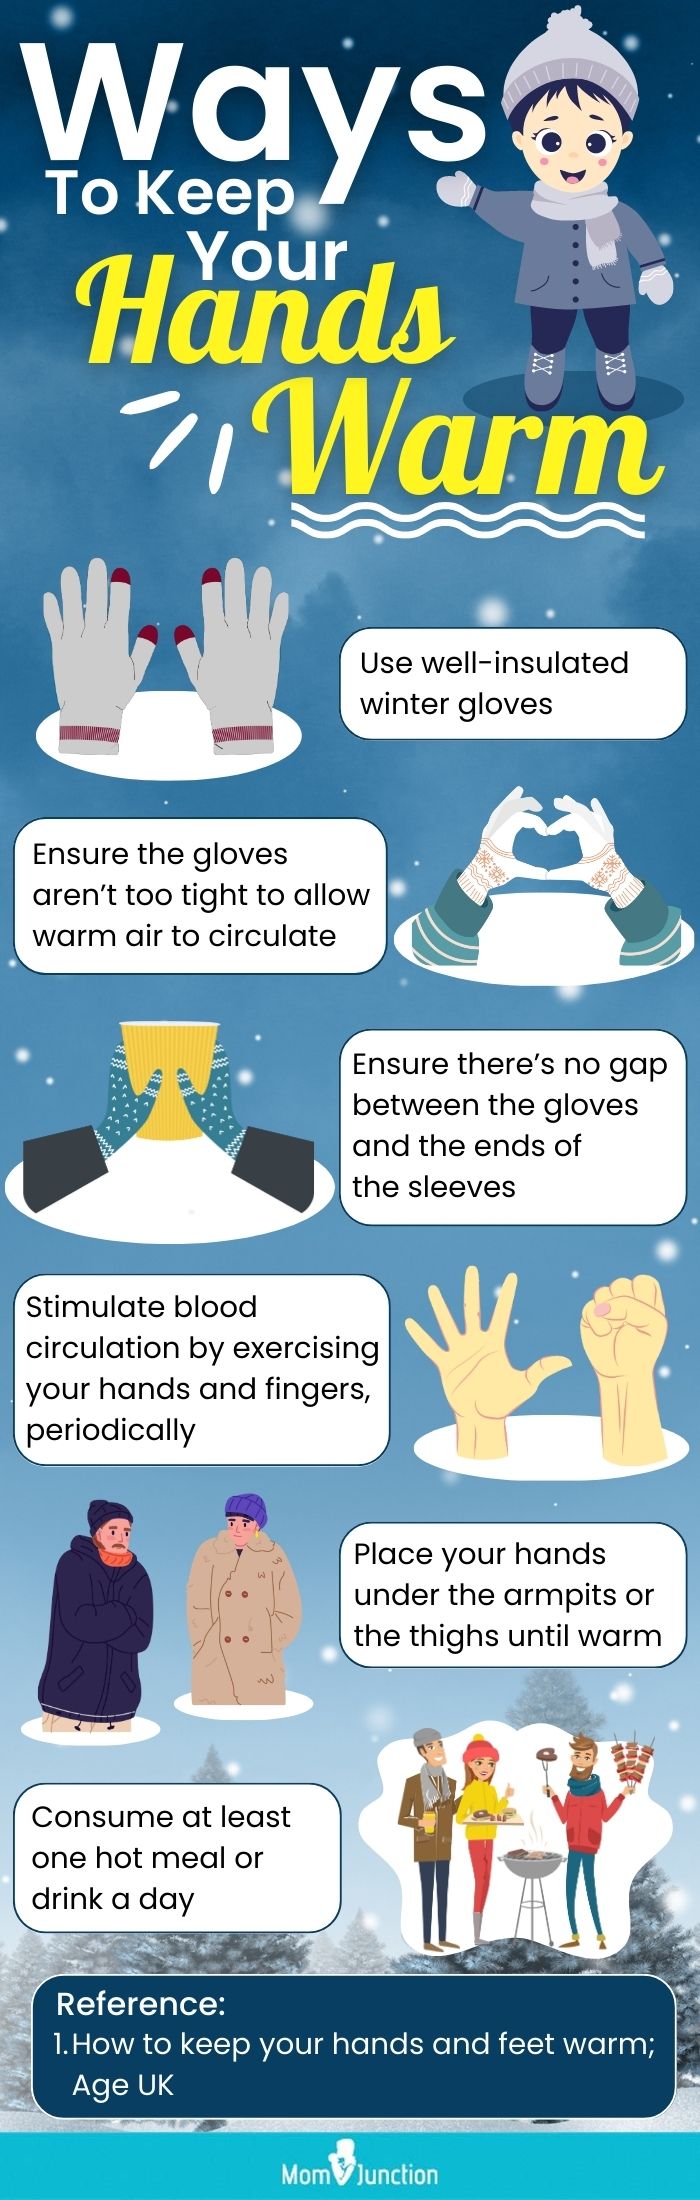 Ways To Keep Your Hands Warm